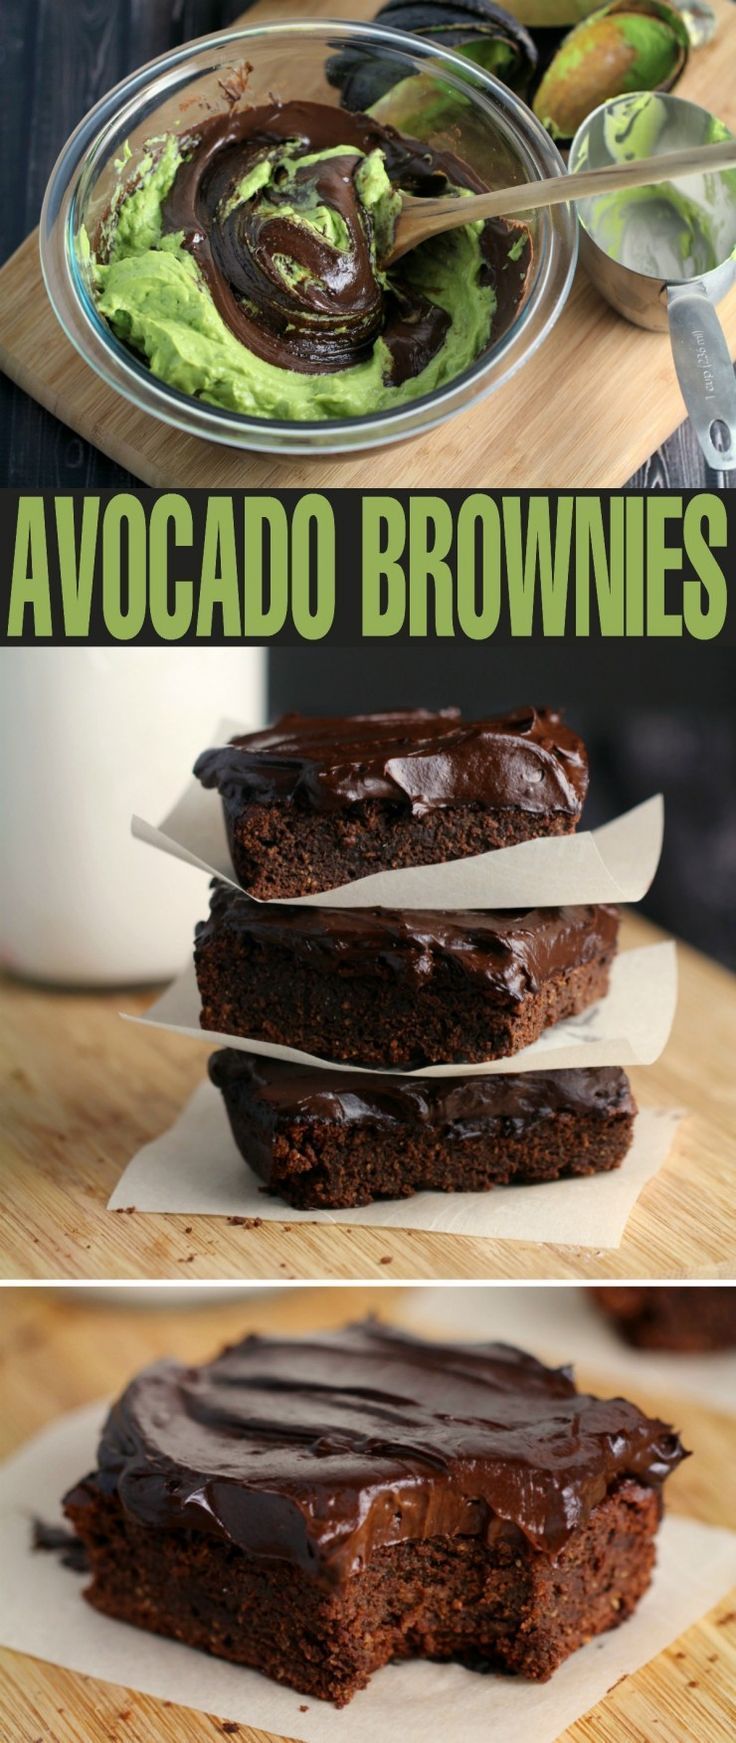 These Fudgy Avocado Brownies with Avocado Frosting are an incredible gluten-free healthier brownie for when you want all the